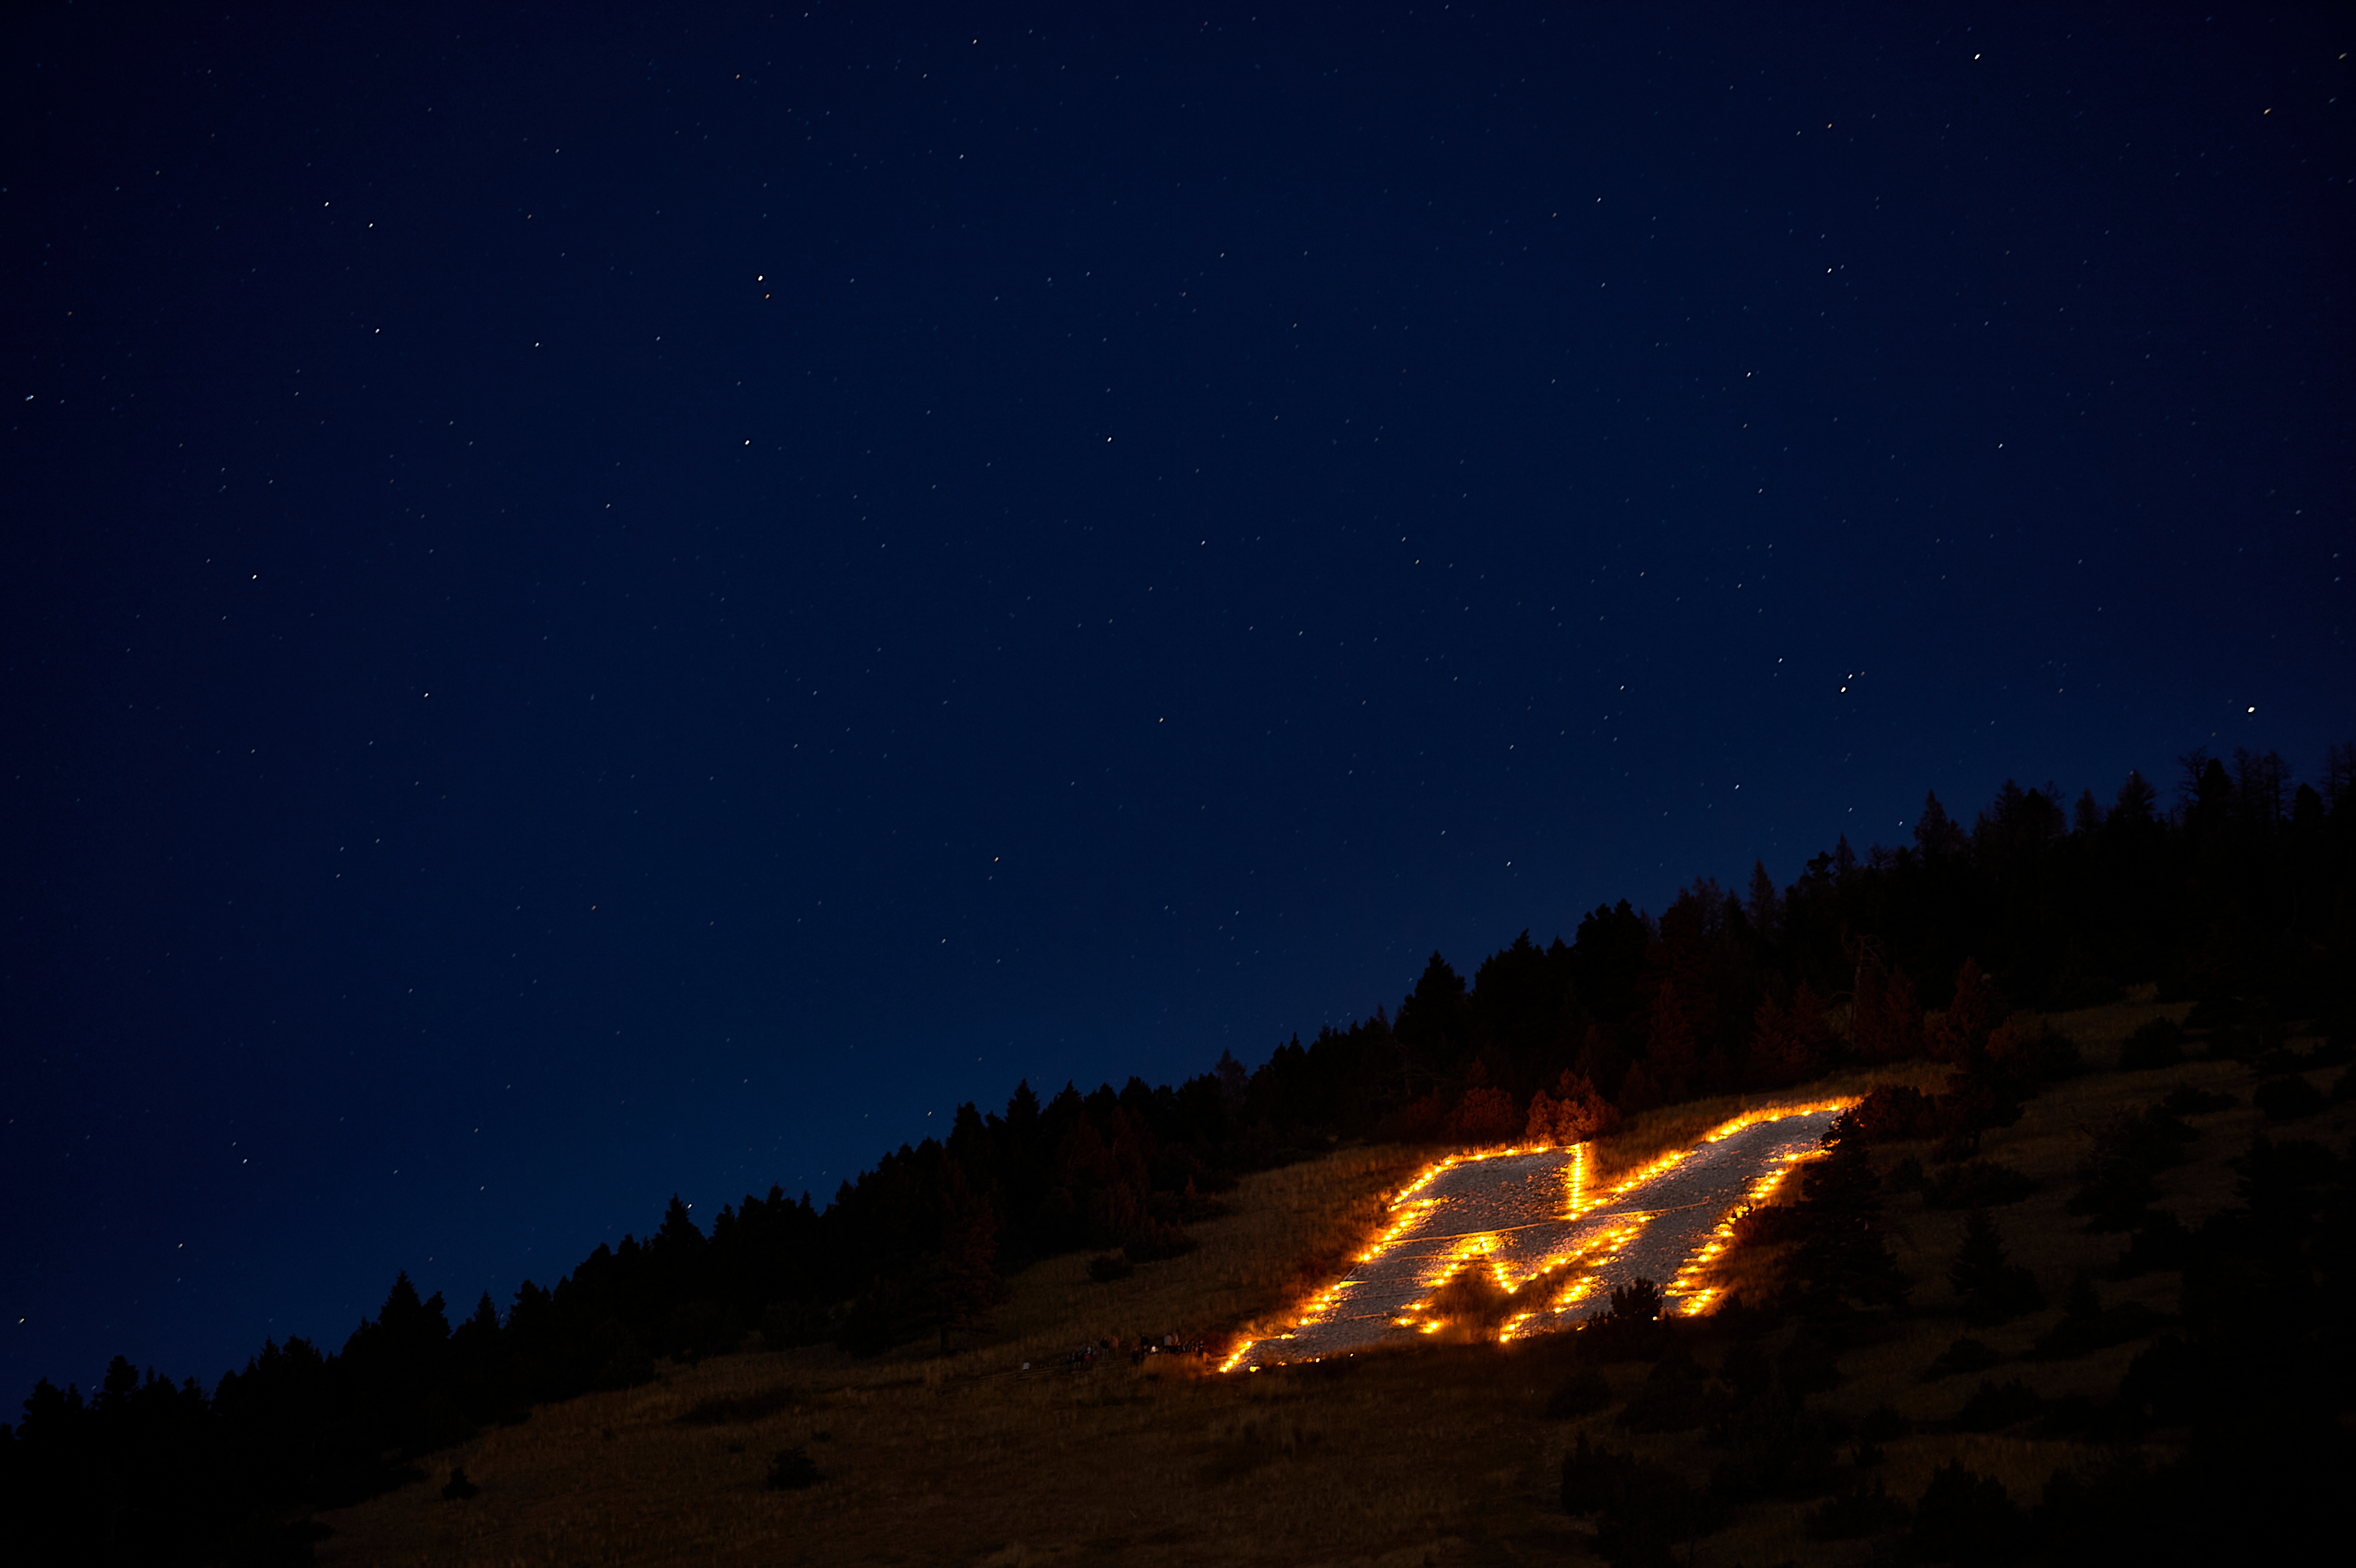 the "M" on the side of the mountain in Bozeman at night with the outline illuminated by candles